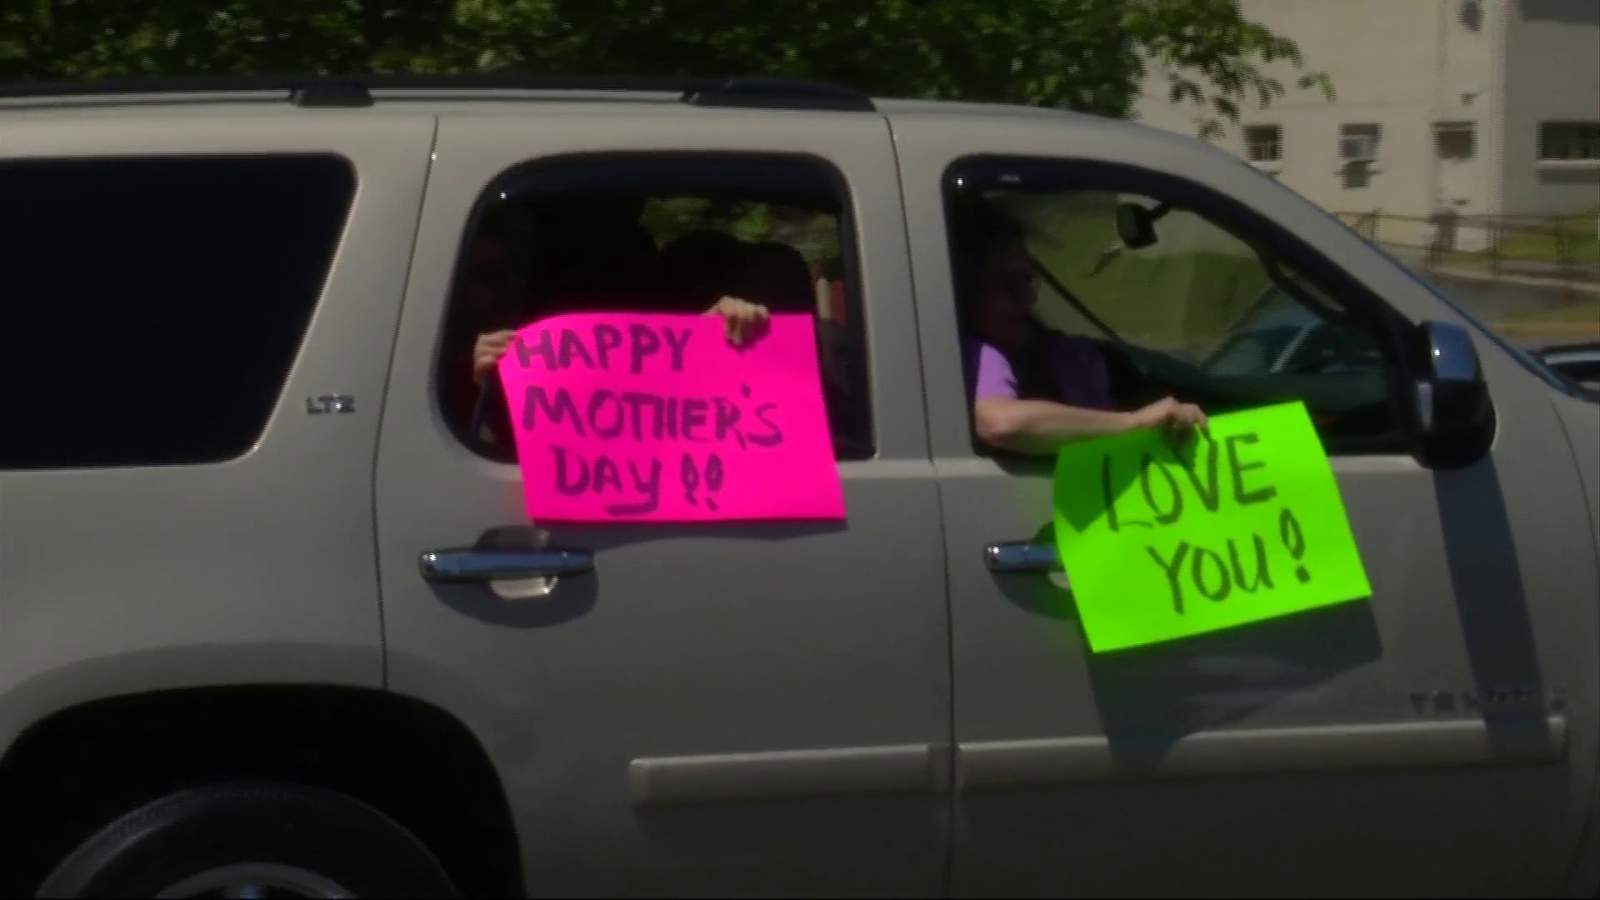 Radford nursing home residents experience an incredible Mother’s Day surprise